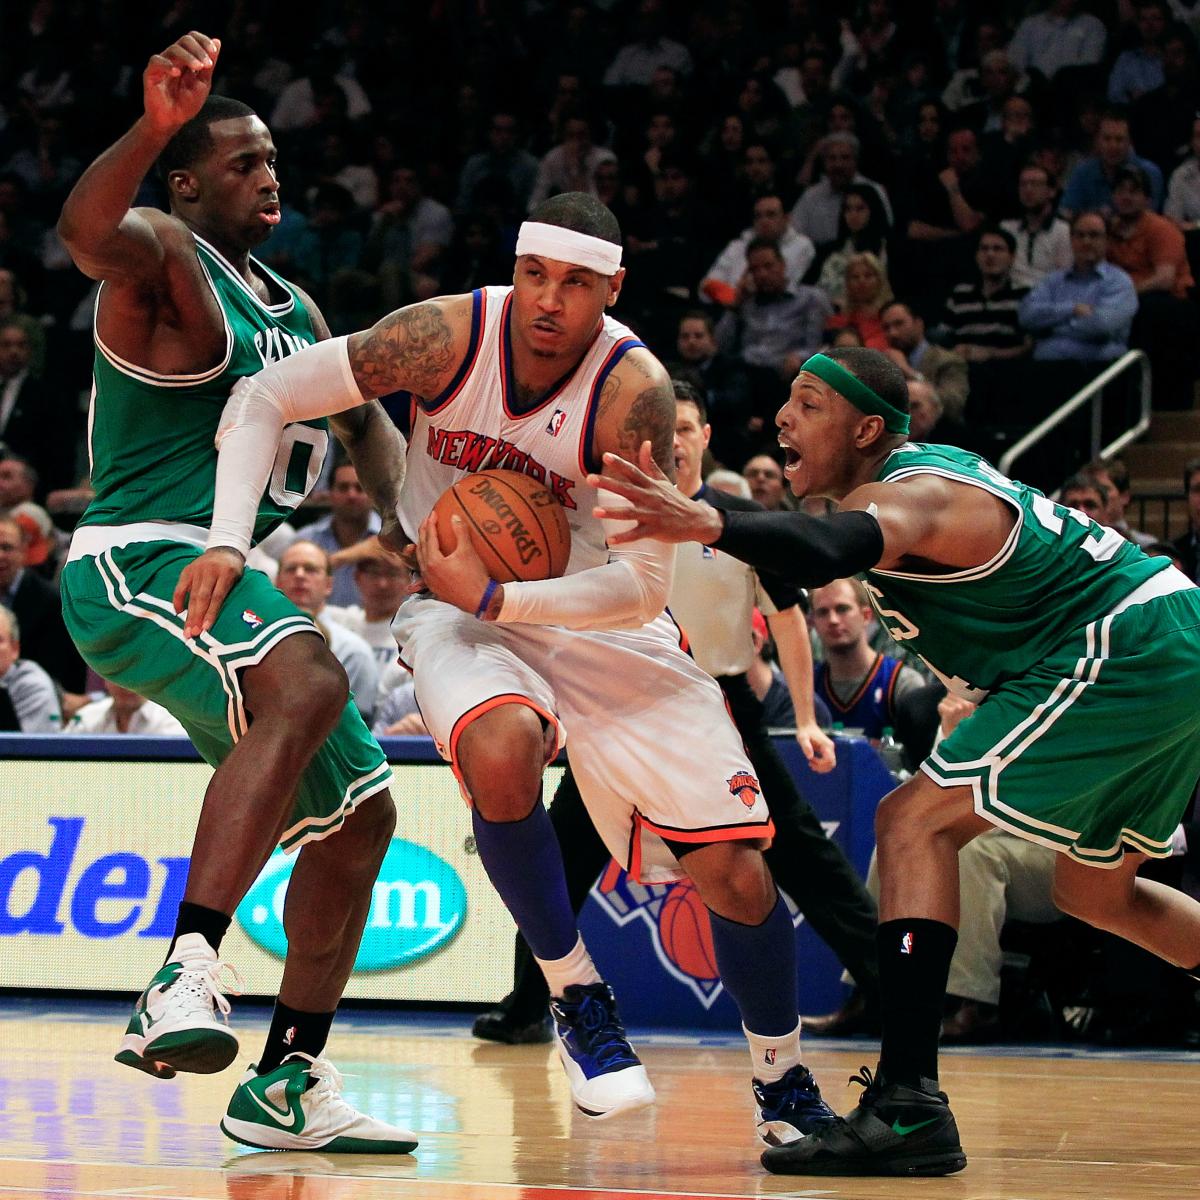 How Do the Boston Celtics Match Up with the New York Knicks? News